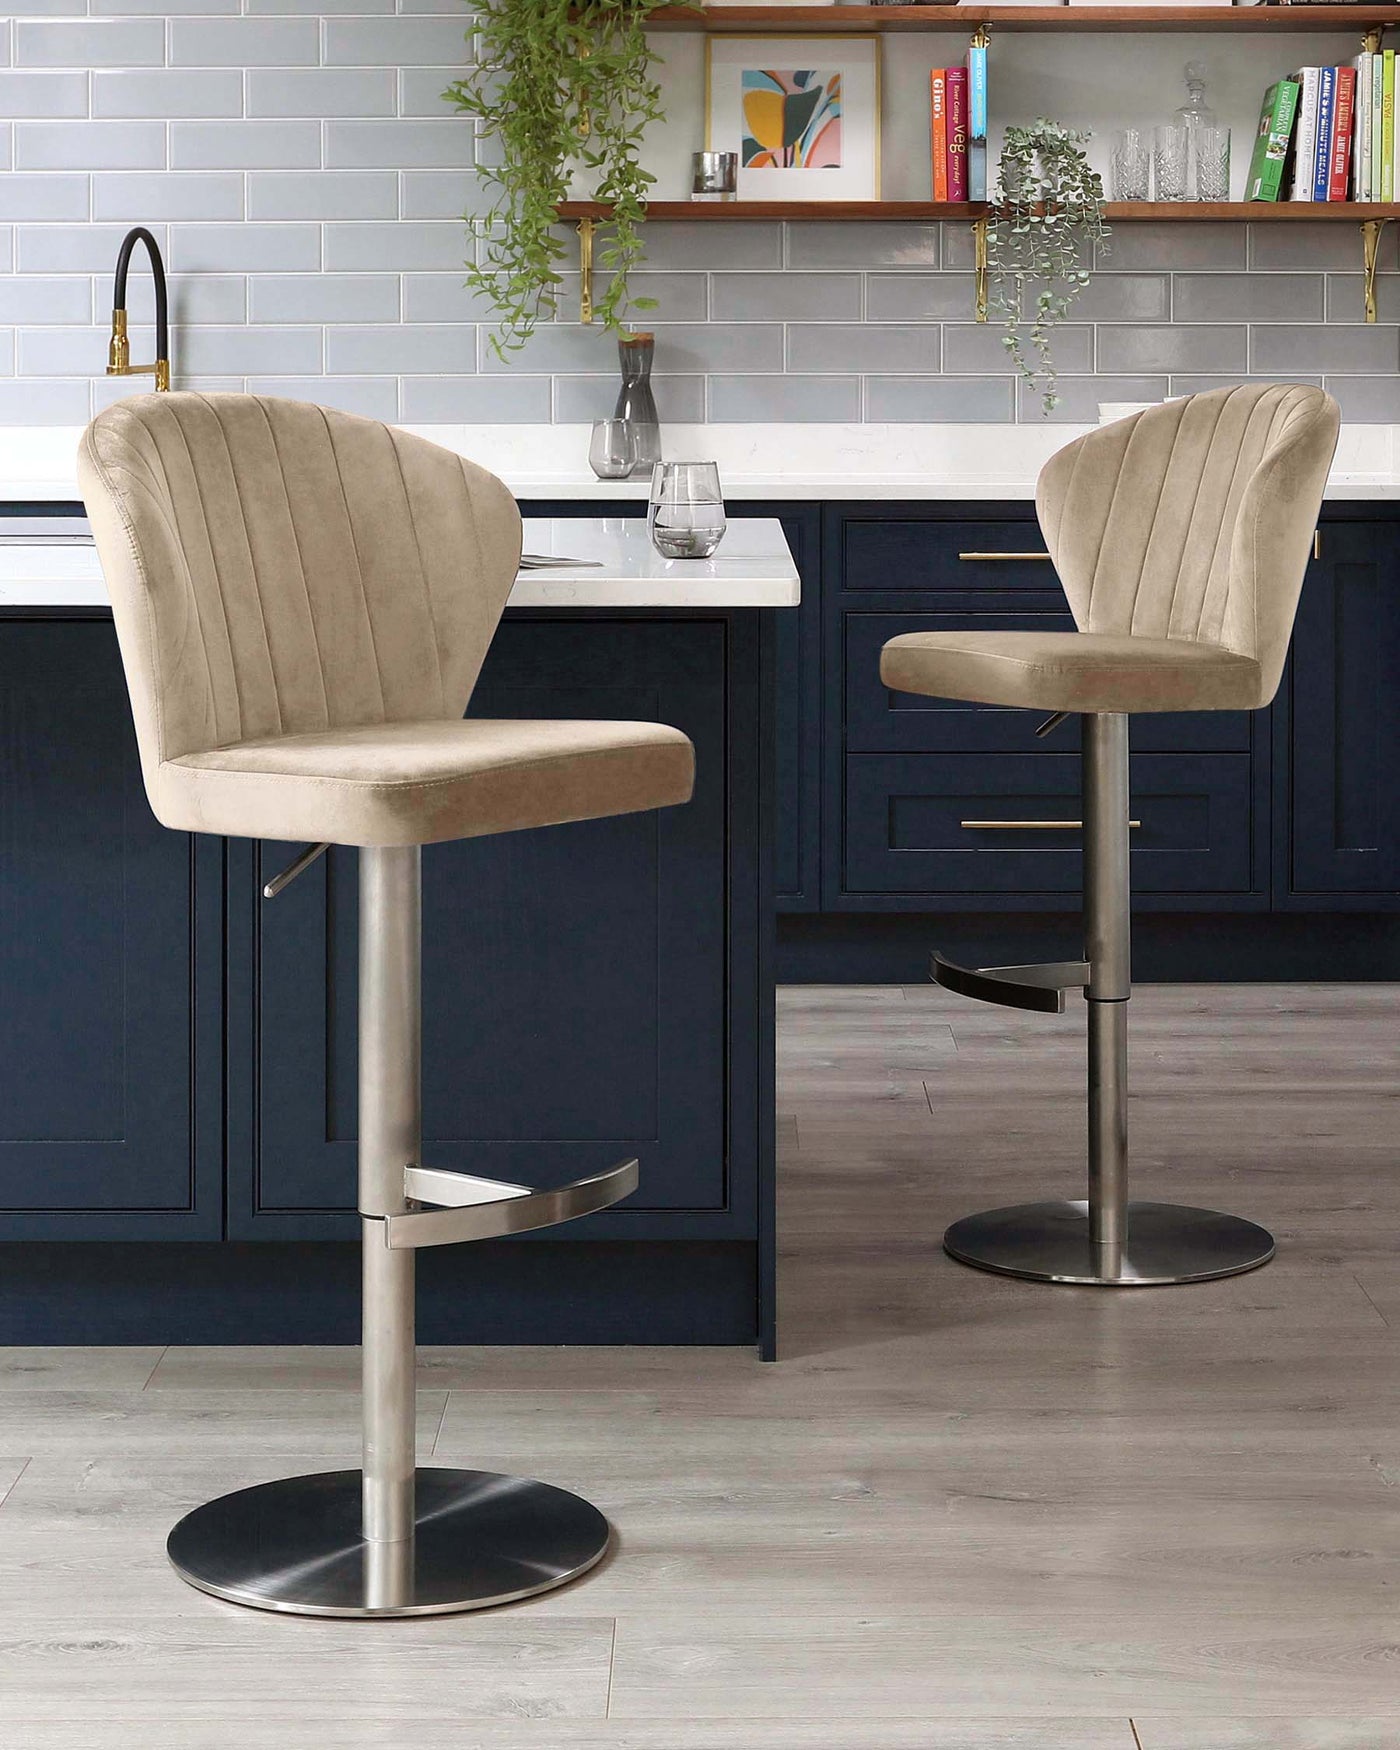 Two contemporary upholstered bar stools with vertical channel tufting, soft beige fabric, and a sleek pedestal base in a chrome finish, featuring a footrest and adjustable height function. The stools are positioned at a kitchen island with a blue cabinet and white countertop, complemented by a grey subway tile backsplash.